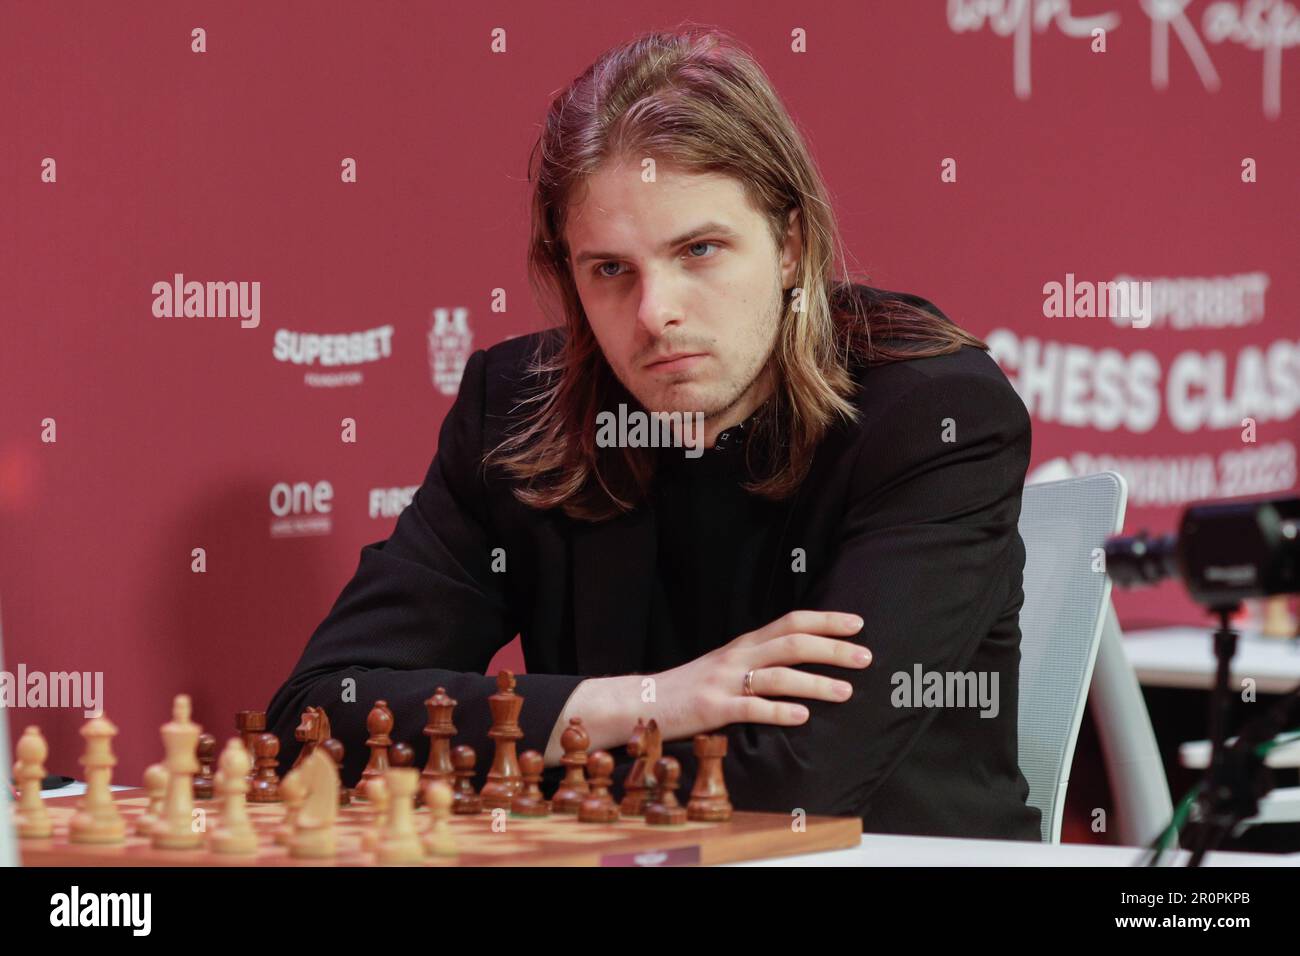 Richard Rapport: Emotional Attachment to Long Hair and Chess